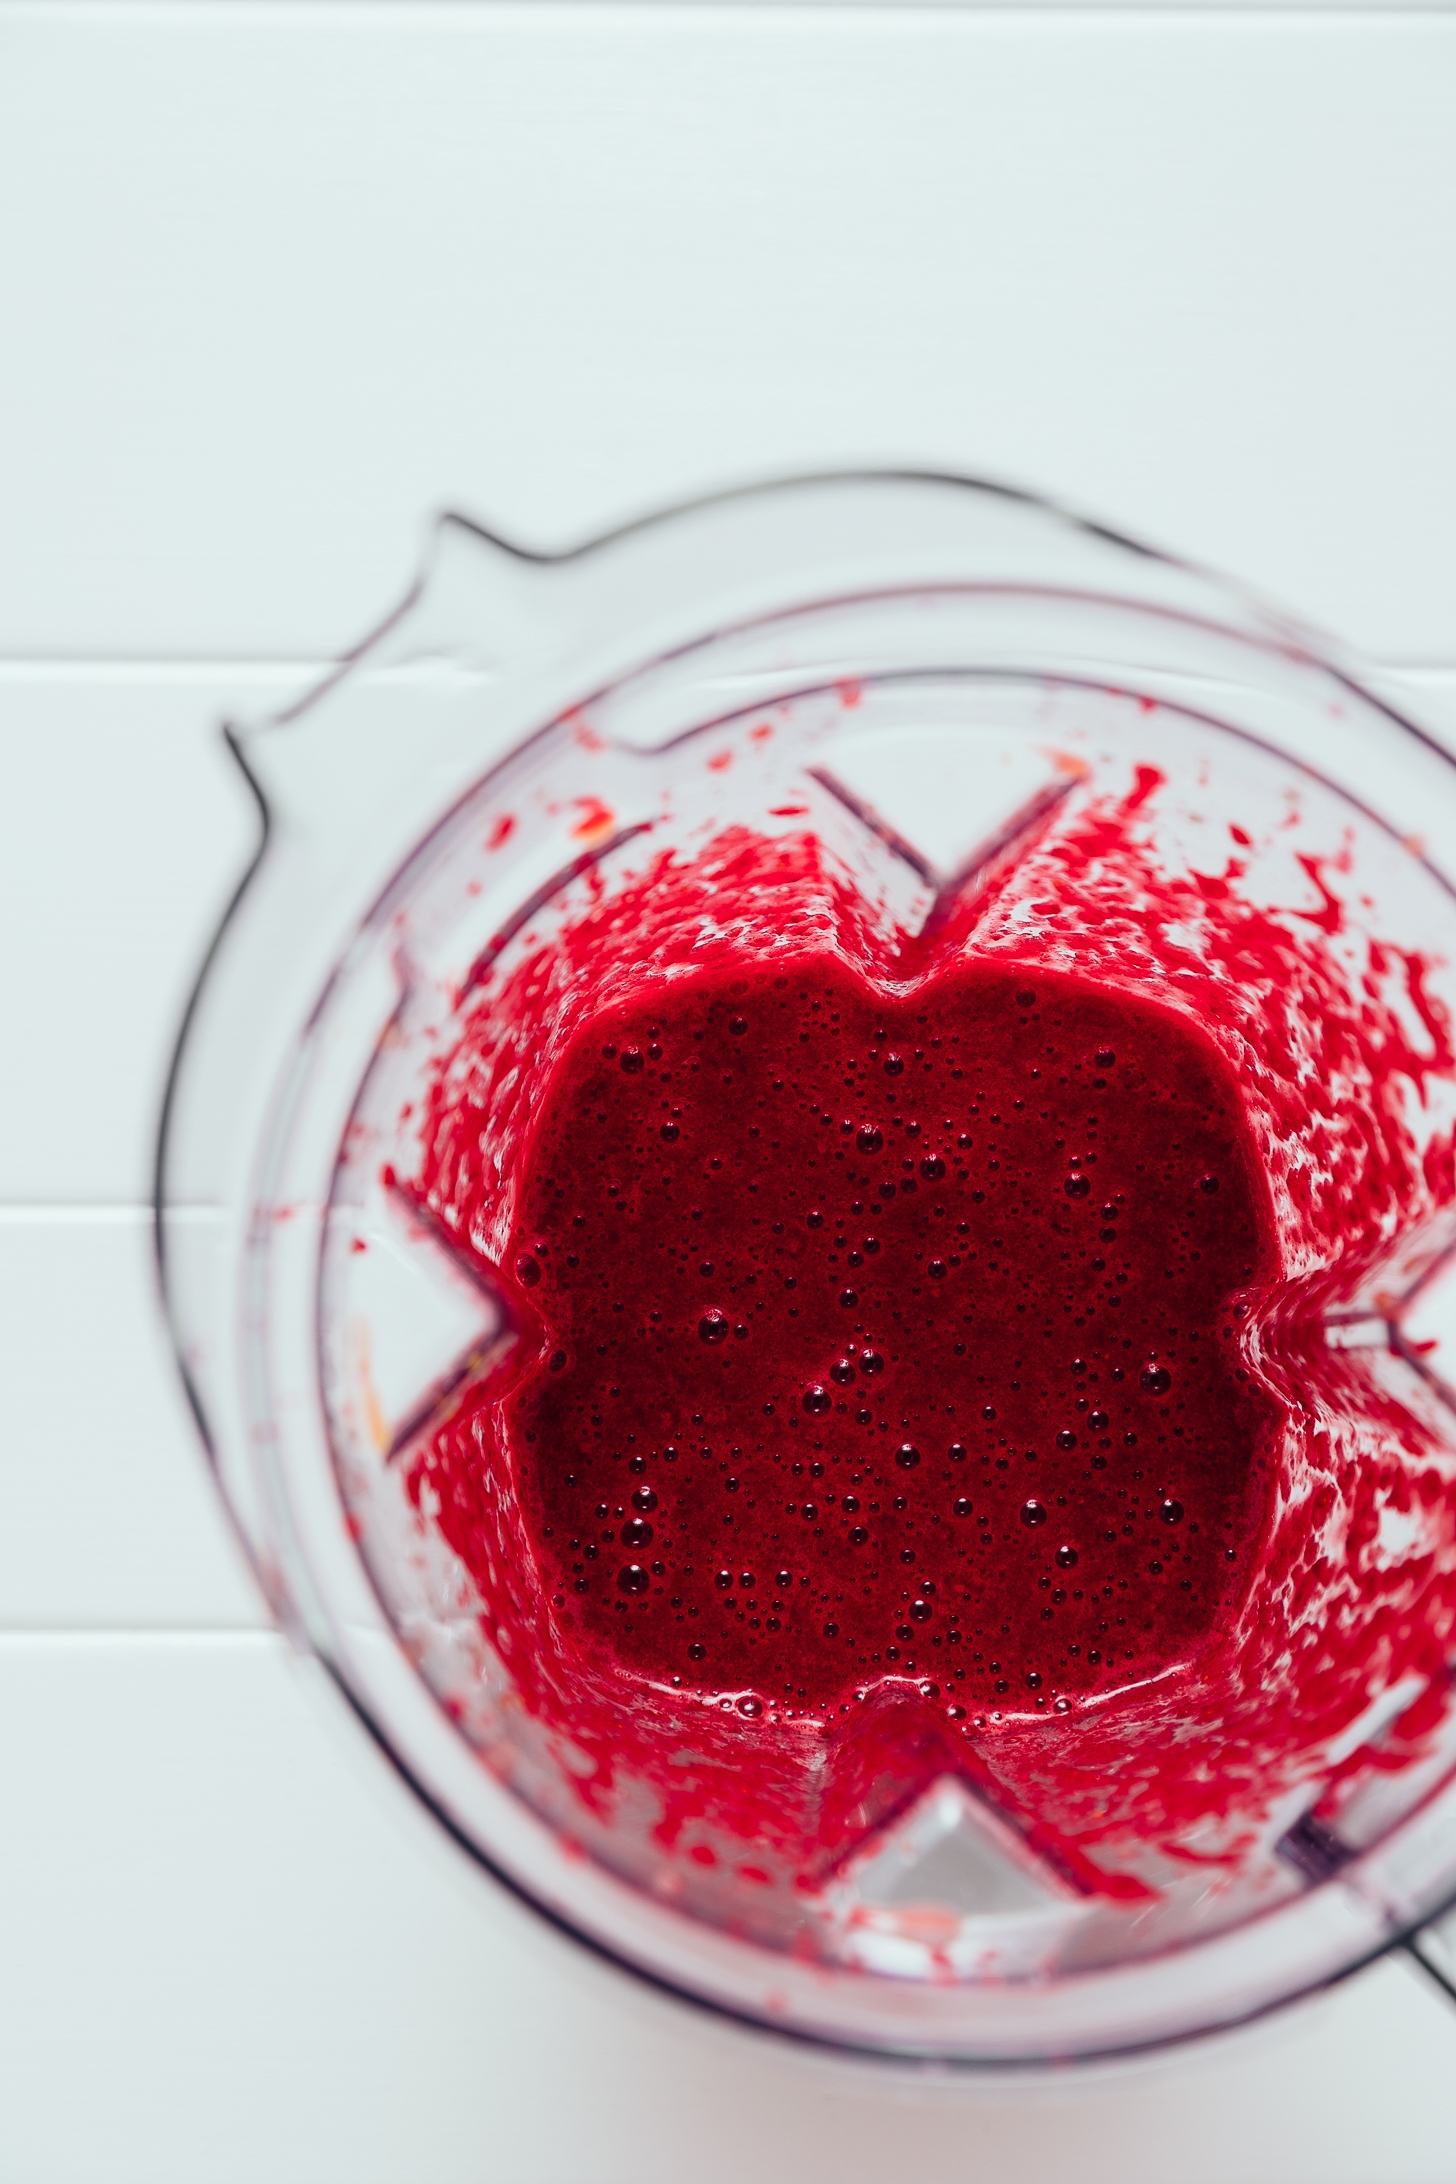 Blender filled with freshly blended Beet and Berry Smoothie